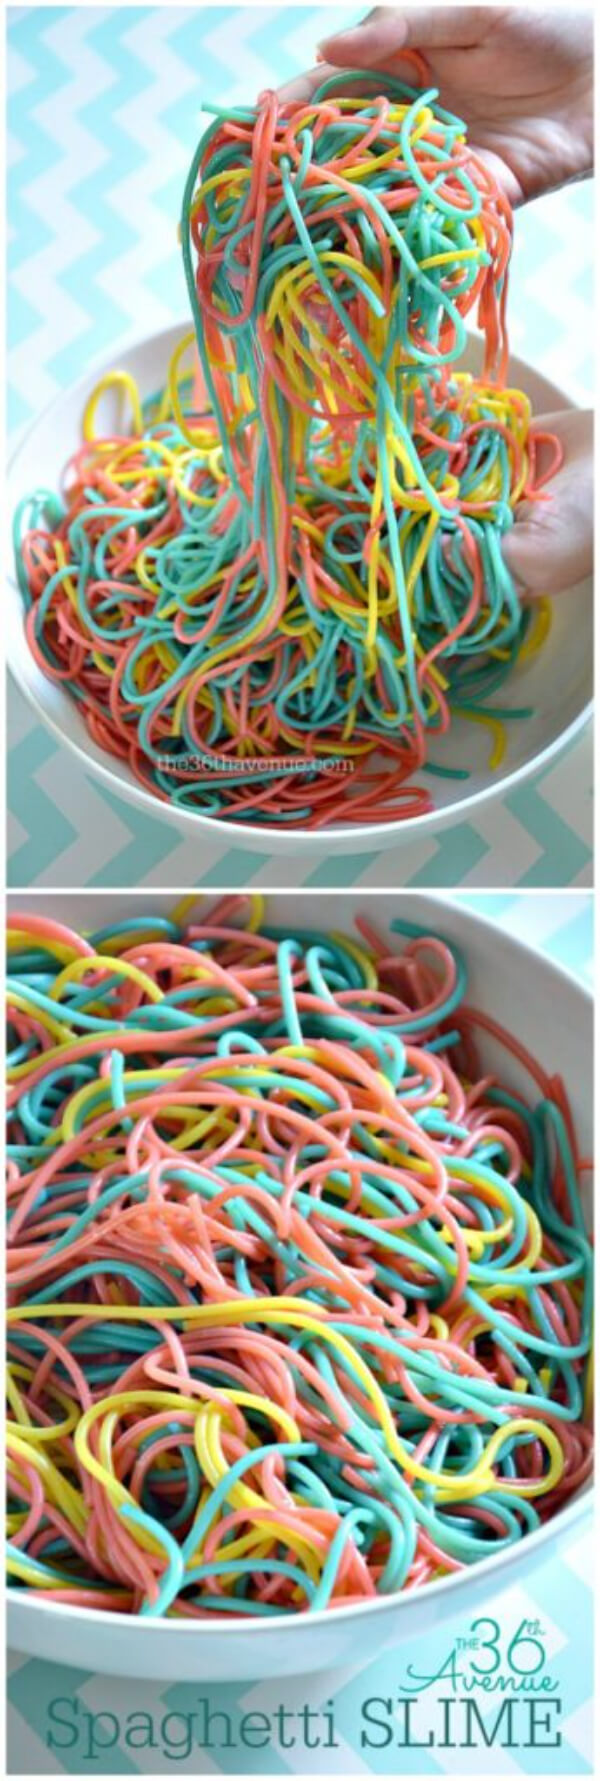 Colorful Spaghetti Slime Fun Activity For Kids - Kool-Aid Projects for Kids